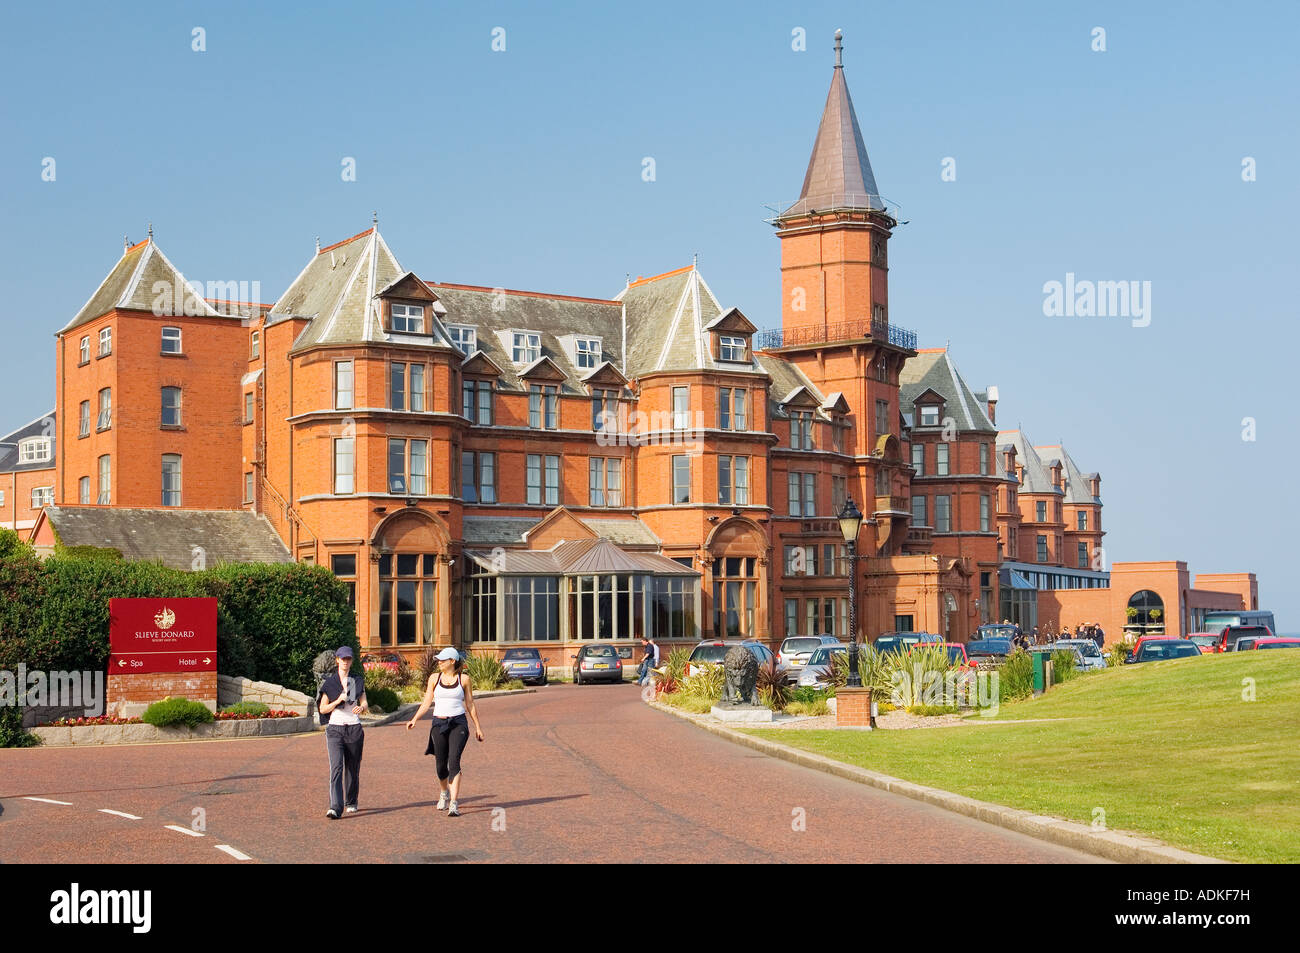 The Victorian period Slieve Donard Hotel, Newcastle, beside the world class Royal County Down golf course, Ireland. Stock Photo